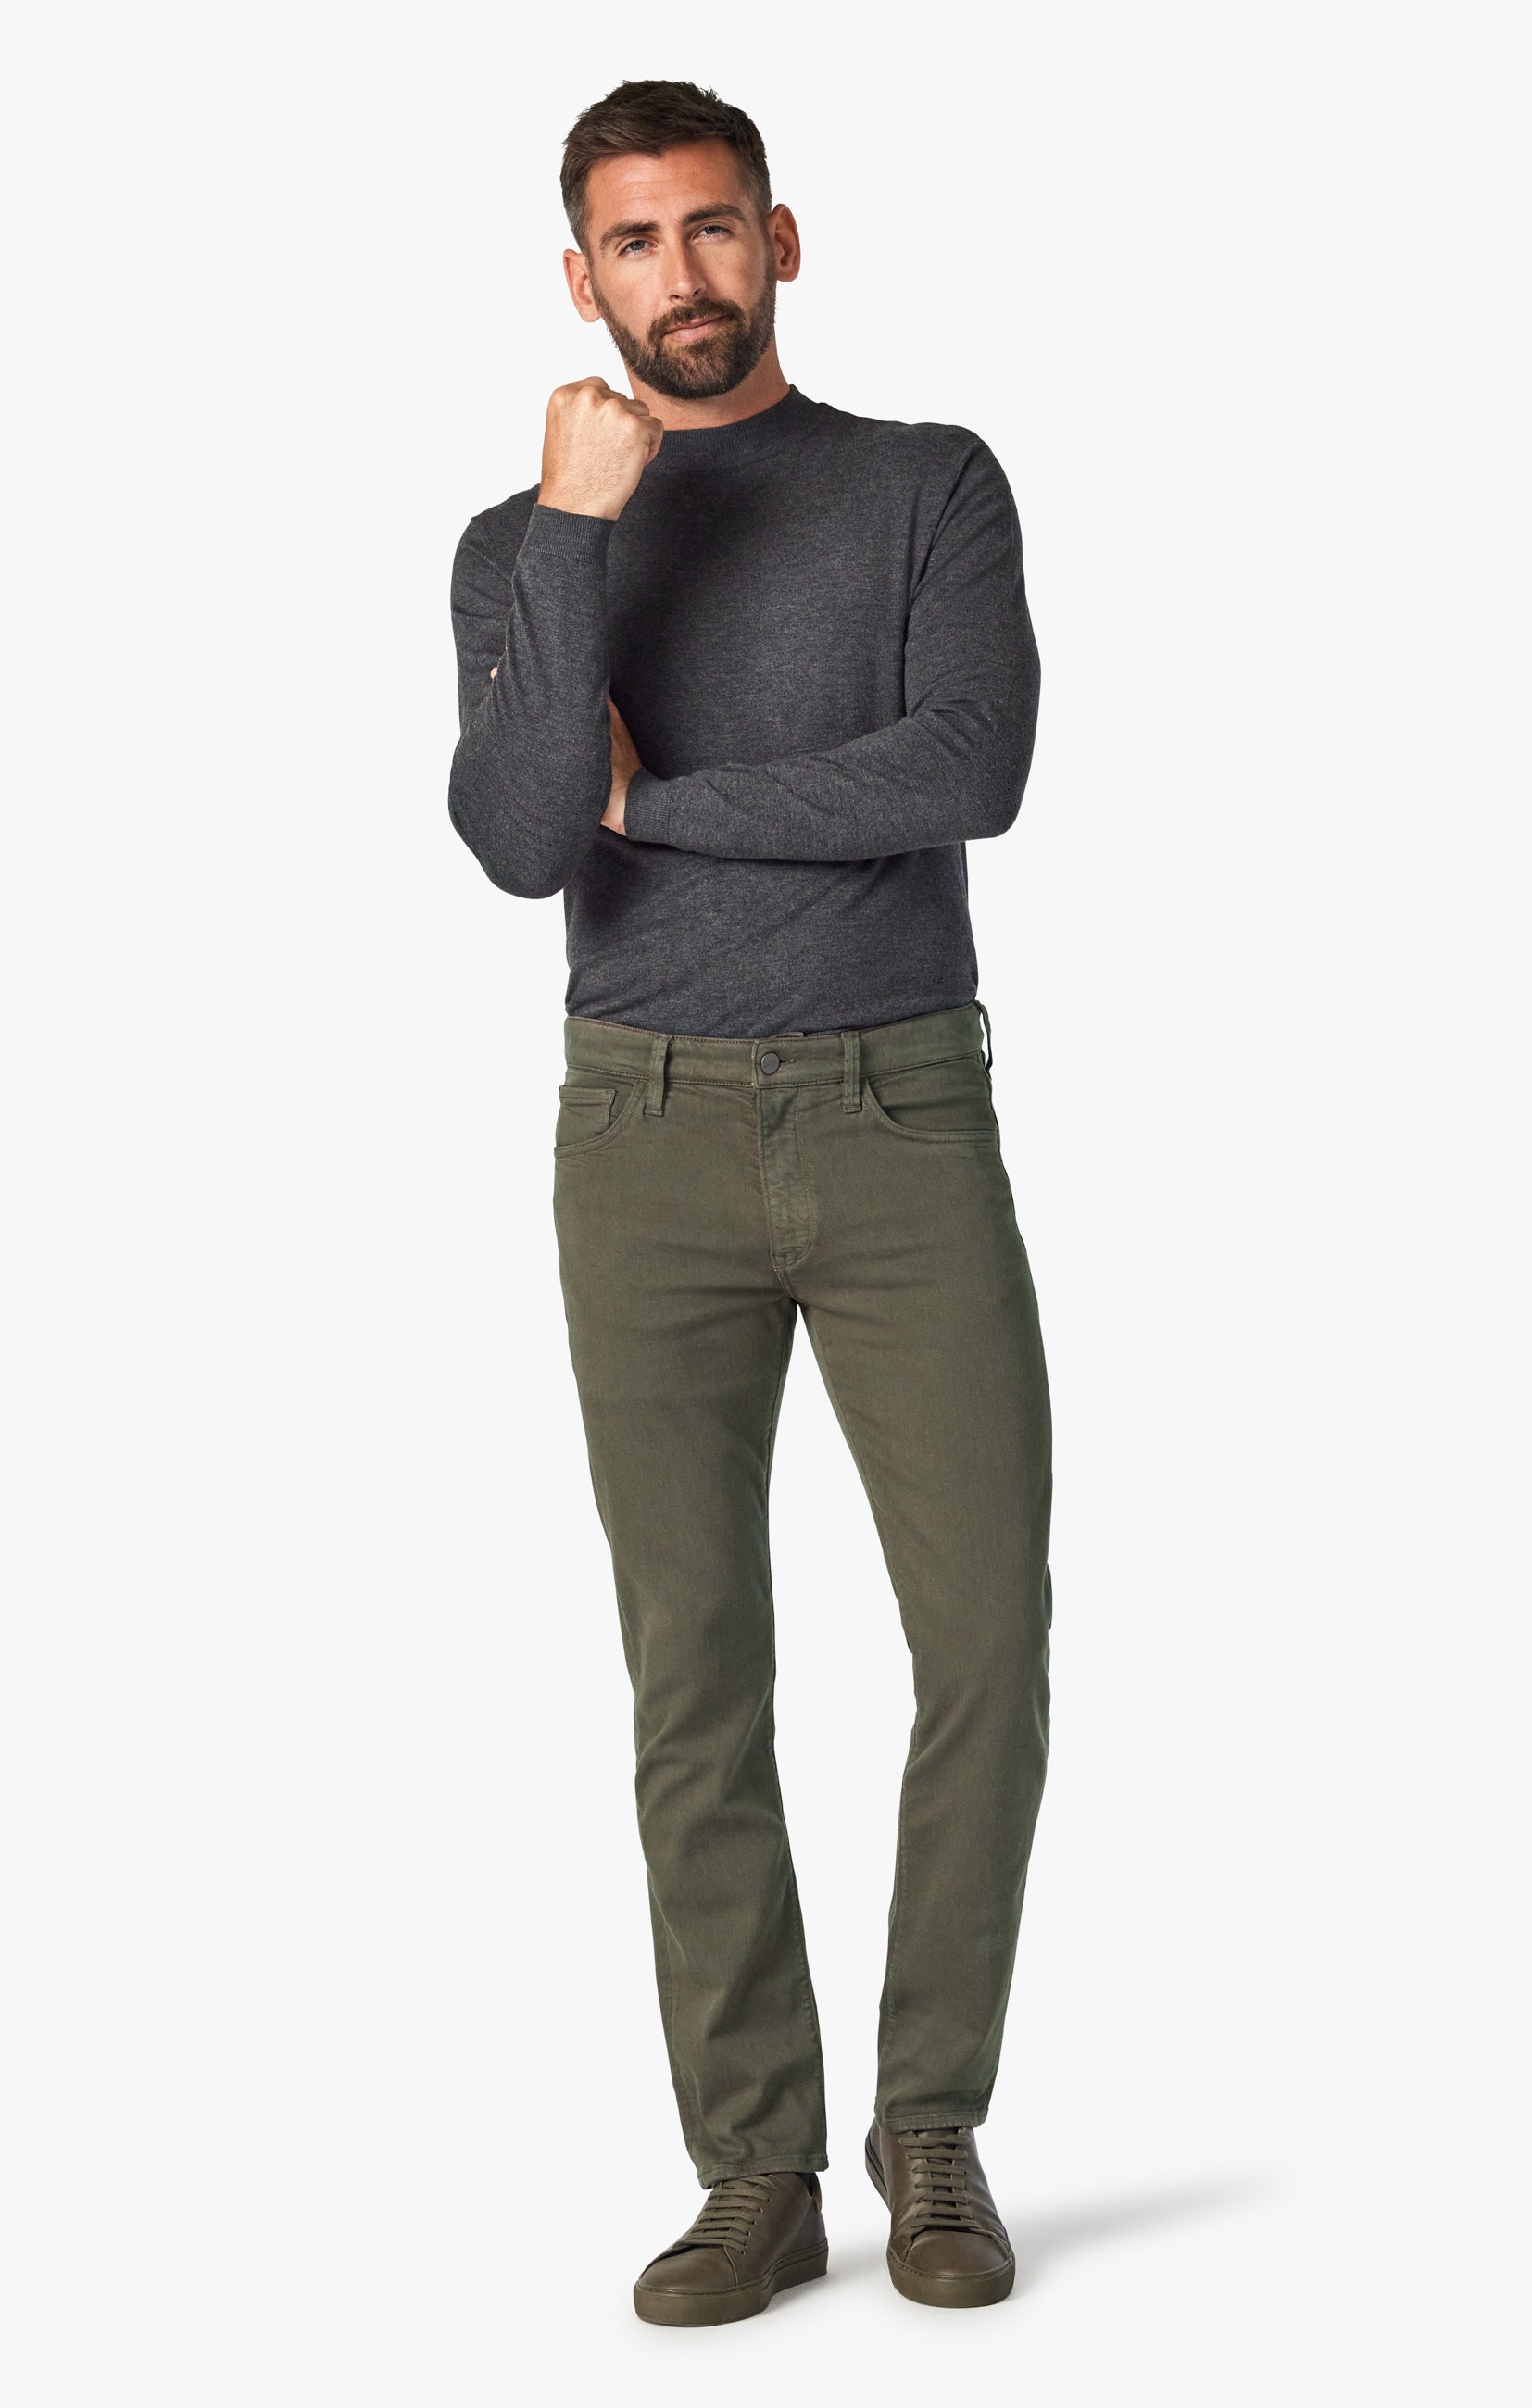 Charisma Classic Fit Pants in Green Comfort Image 1